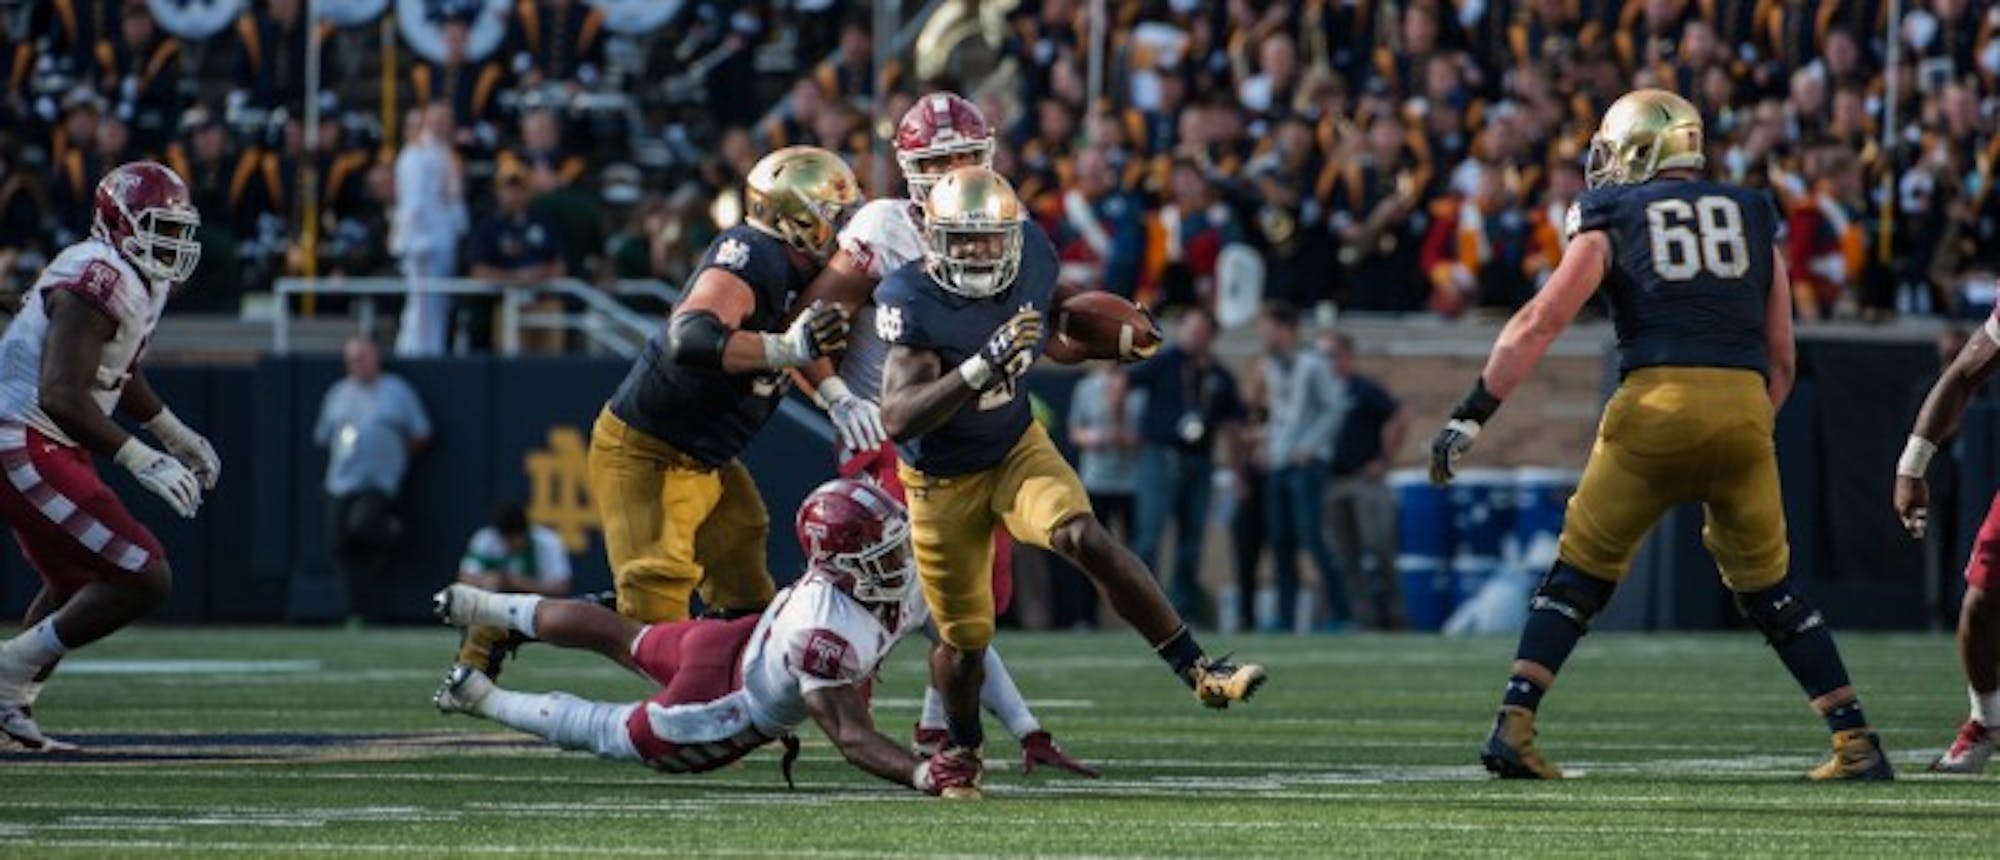 Irish junior running back Dexter Williams slips a tackle and heads upfield during Notre Dame's 49-16 win over Temple on Sunday. Williams tallied 124 yards and a touchdown on six carries in the Irish victory.